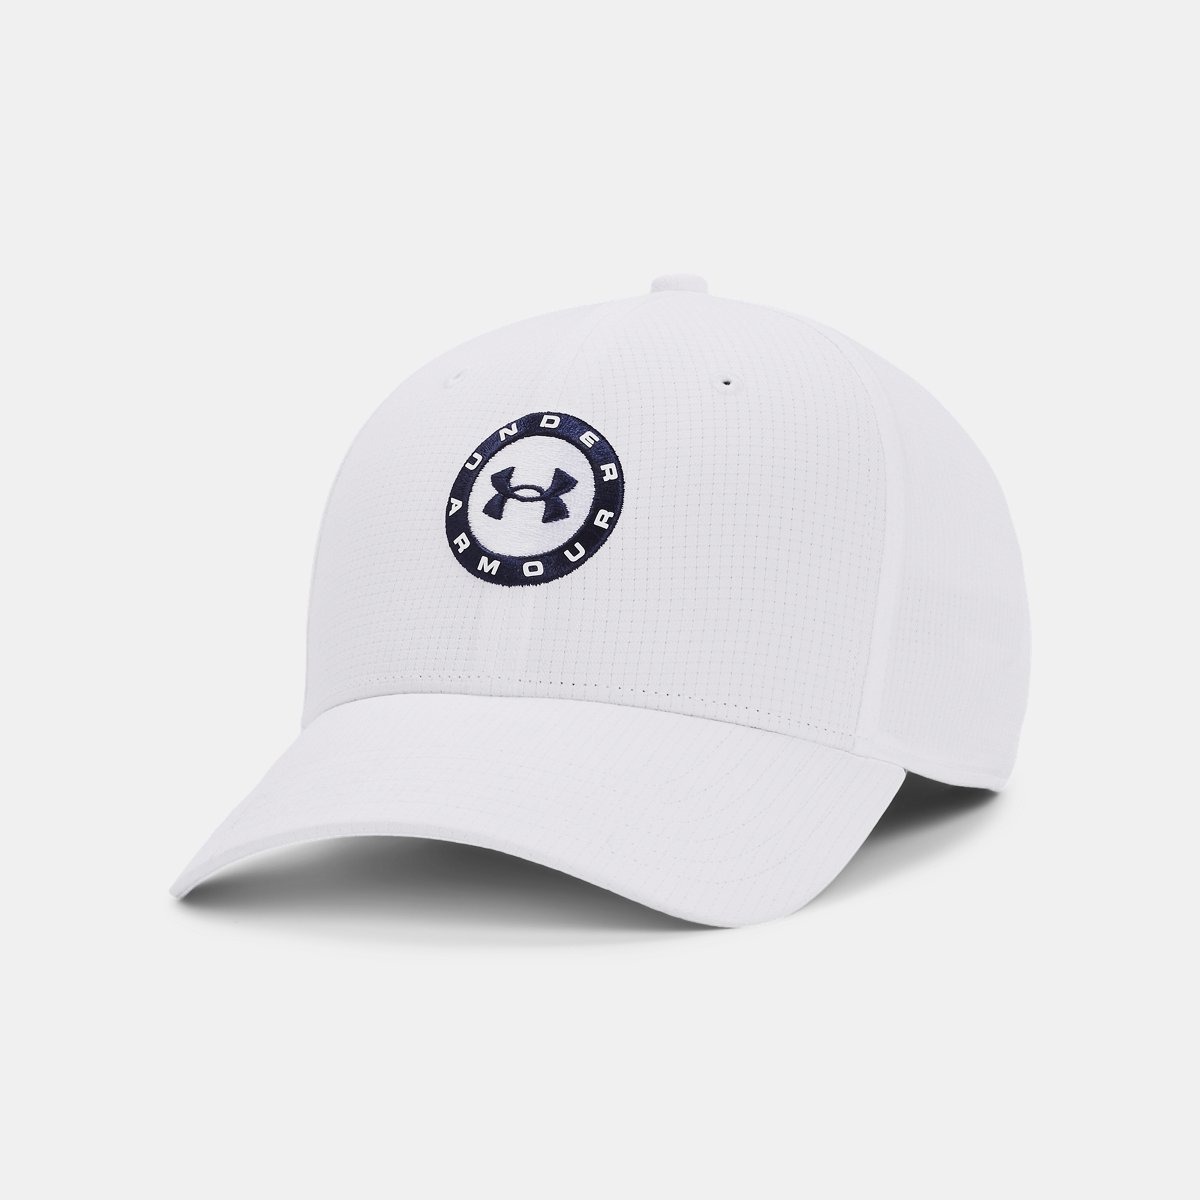 Gents Adjustable Cap in White at Under Armour GOOFASH